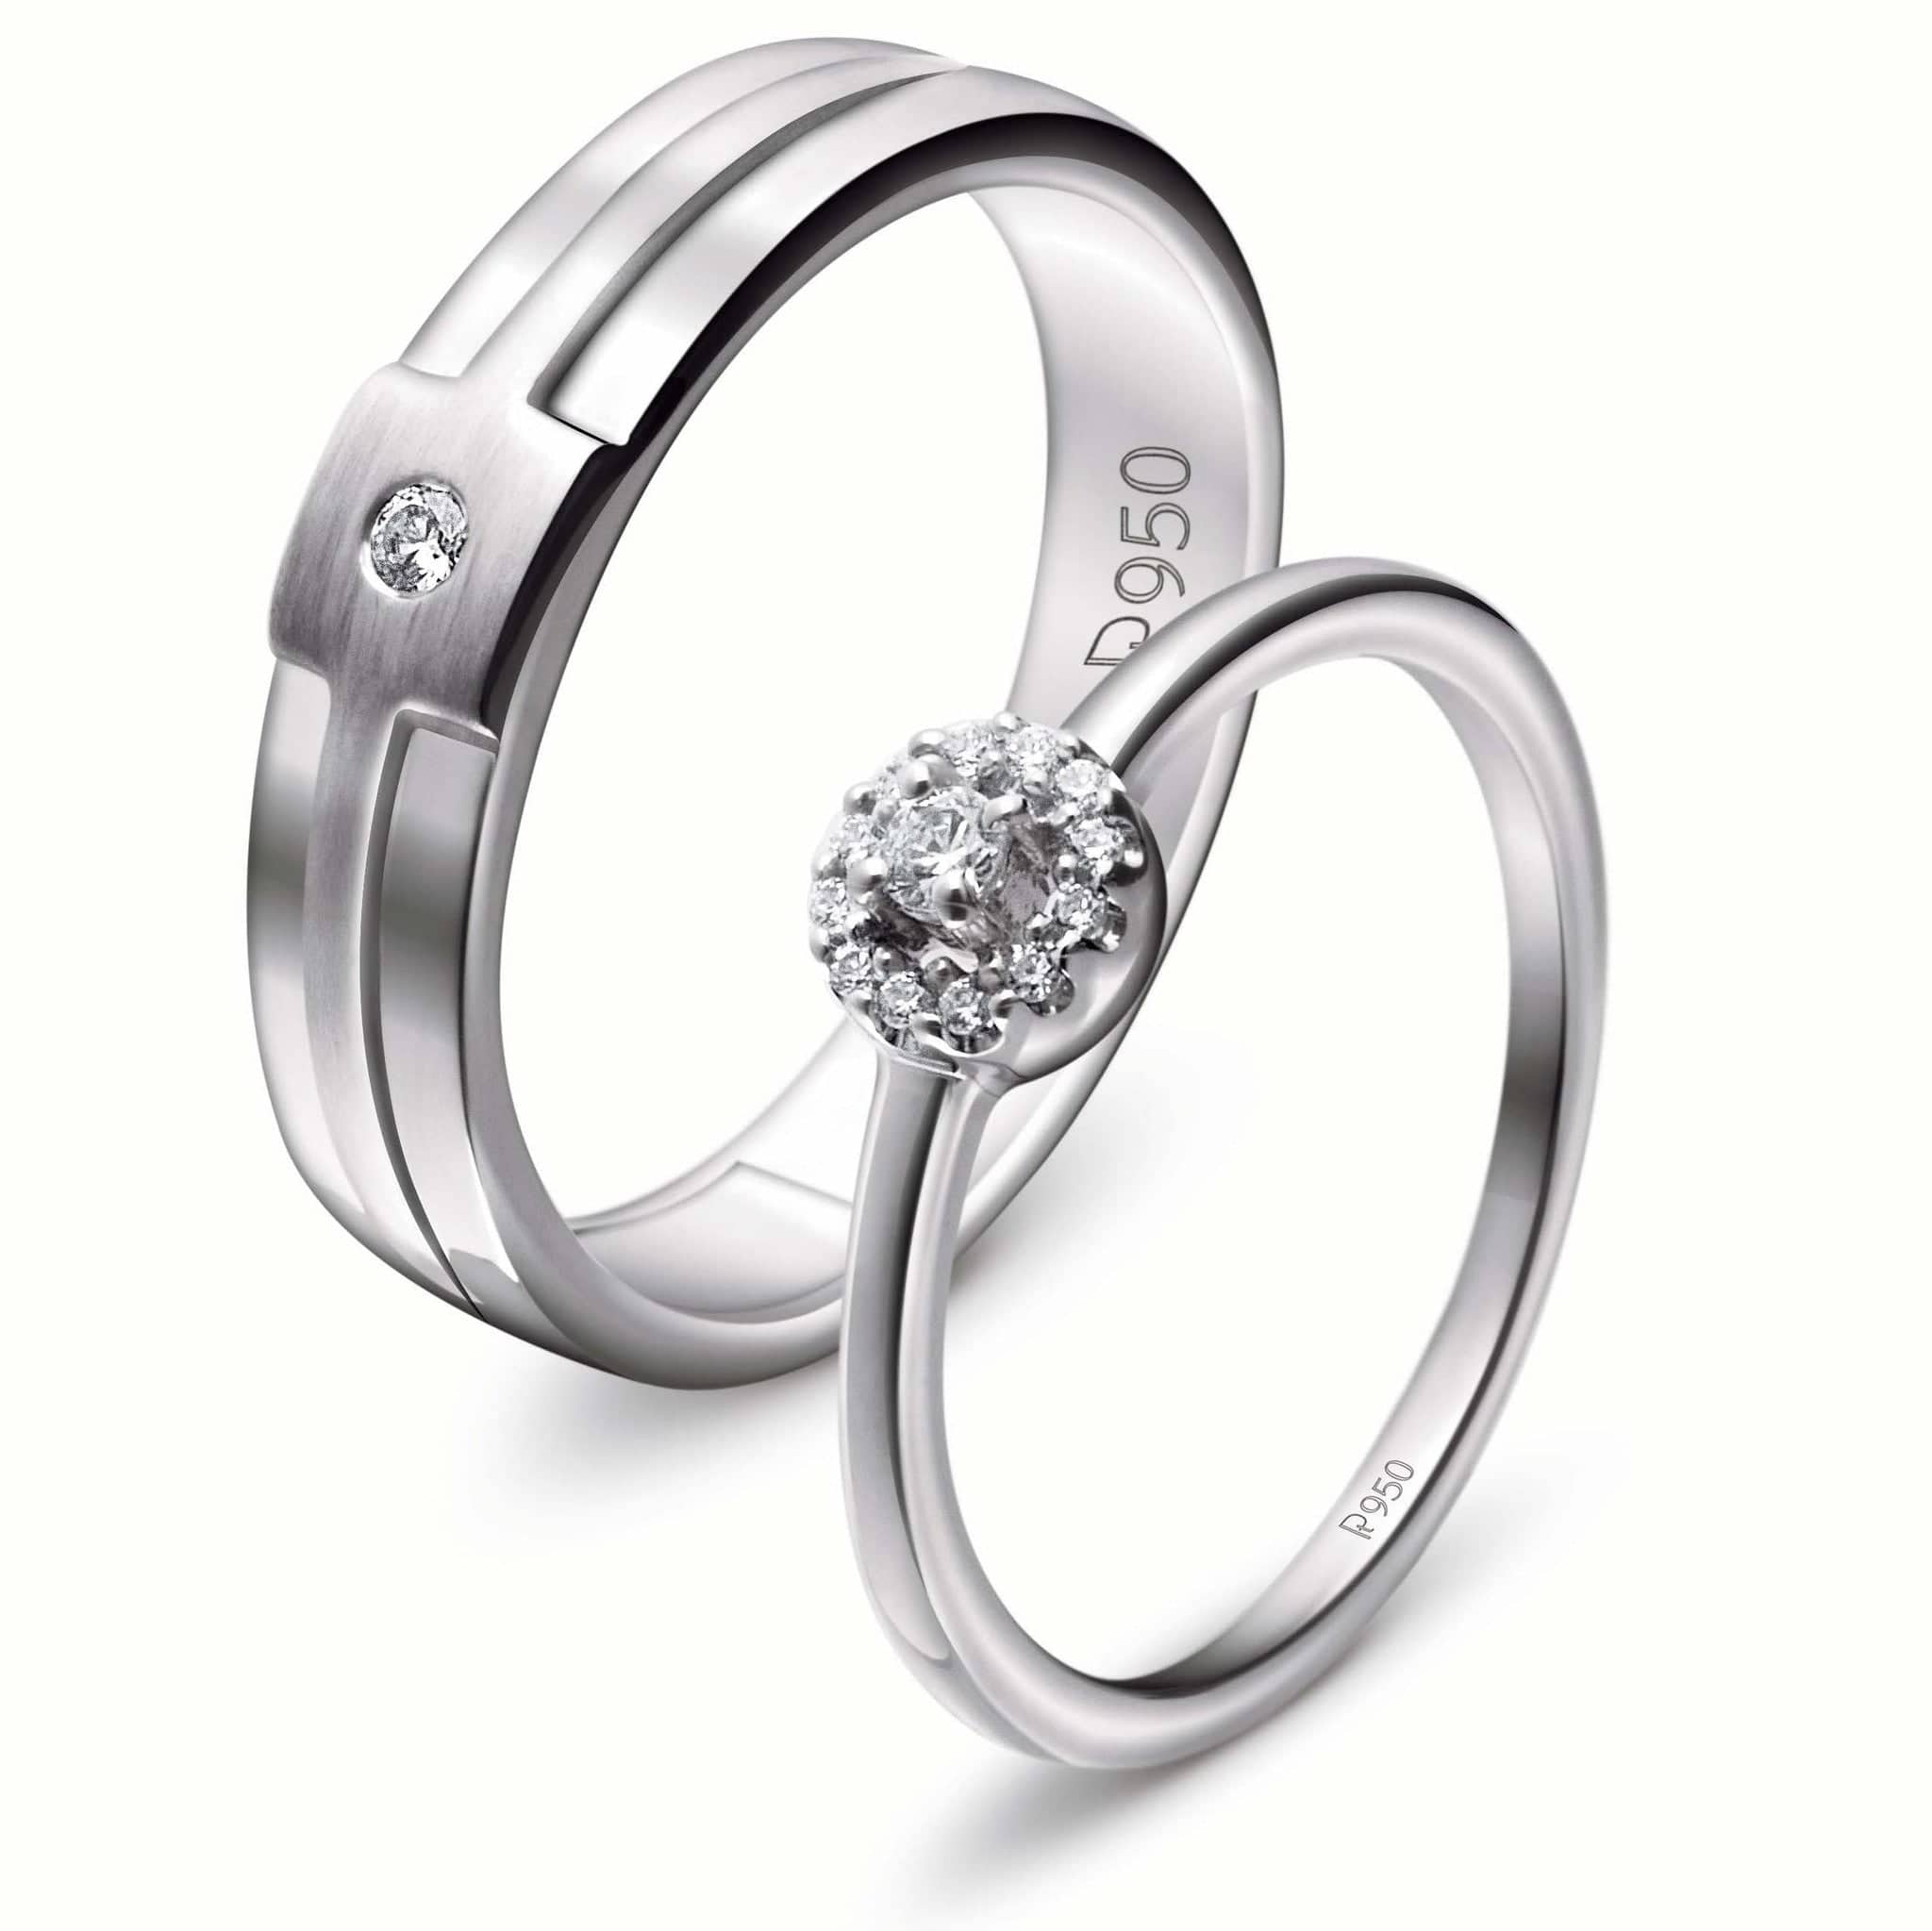 Couples Rings, Simple Couples & Commitment Rings - Jeulia Jewelry